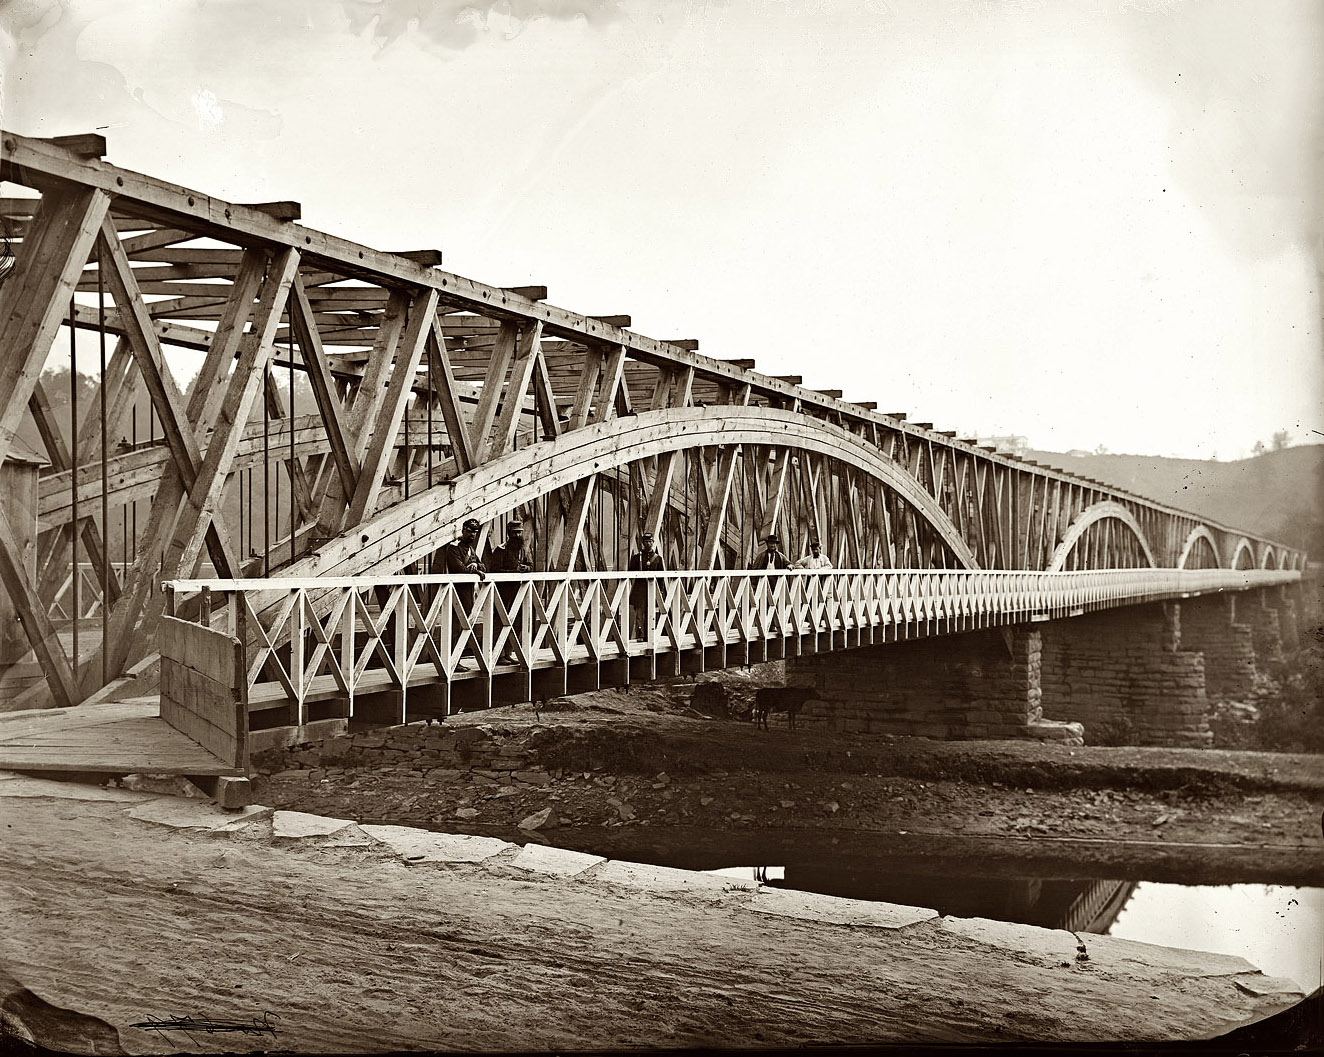 The Chain Bridge over the Potomac River circa 1865, with the Chesapeake & Ohio Canal in the foreground. View full size. Wet collodion glass plate negative by William Morris Smith. From negatives compiled by Milhollen and Mugridge.